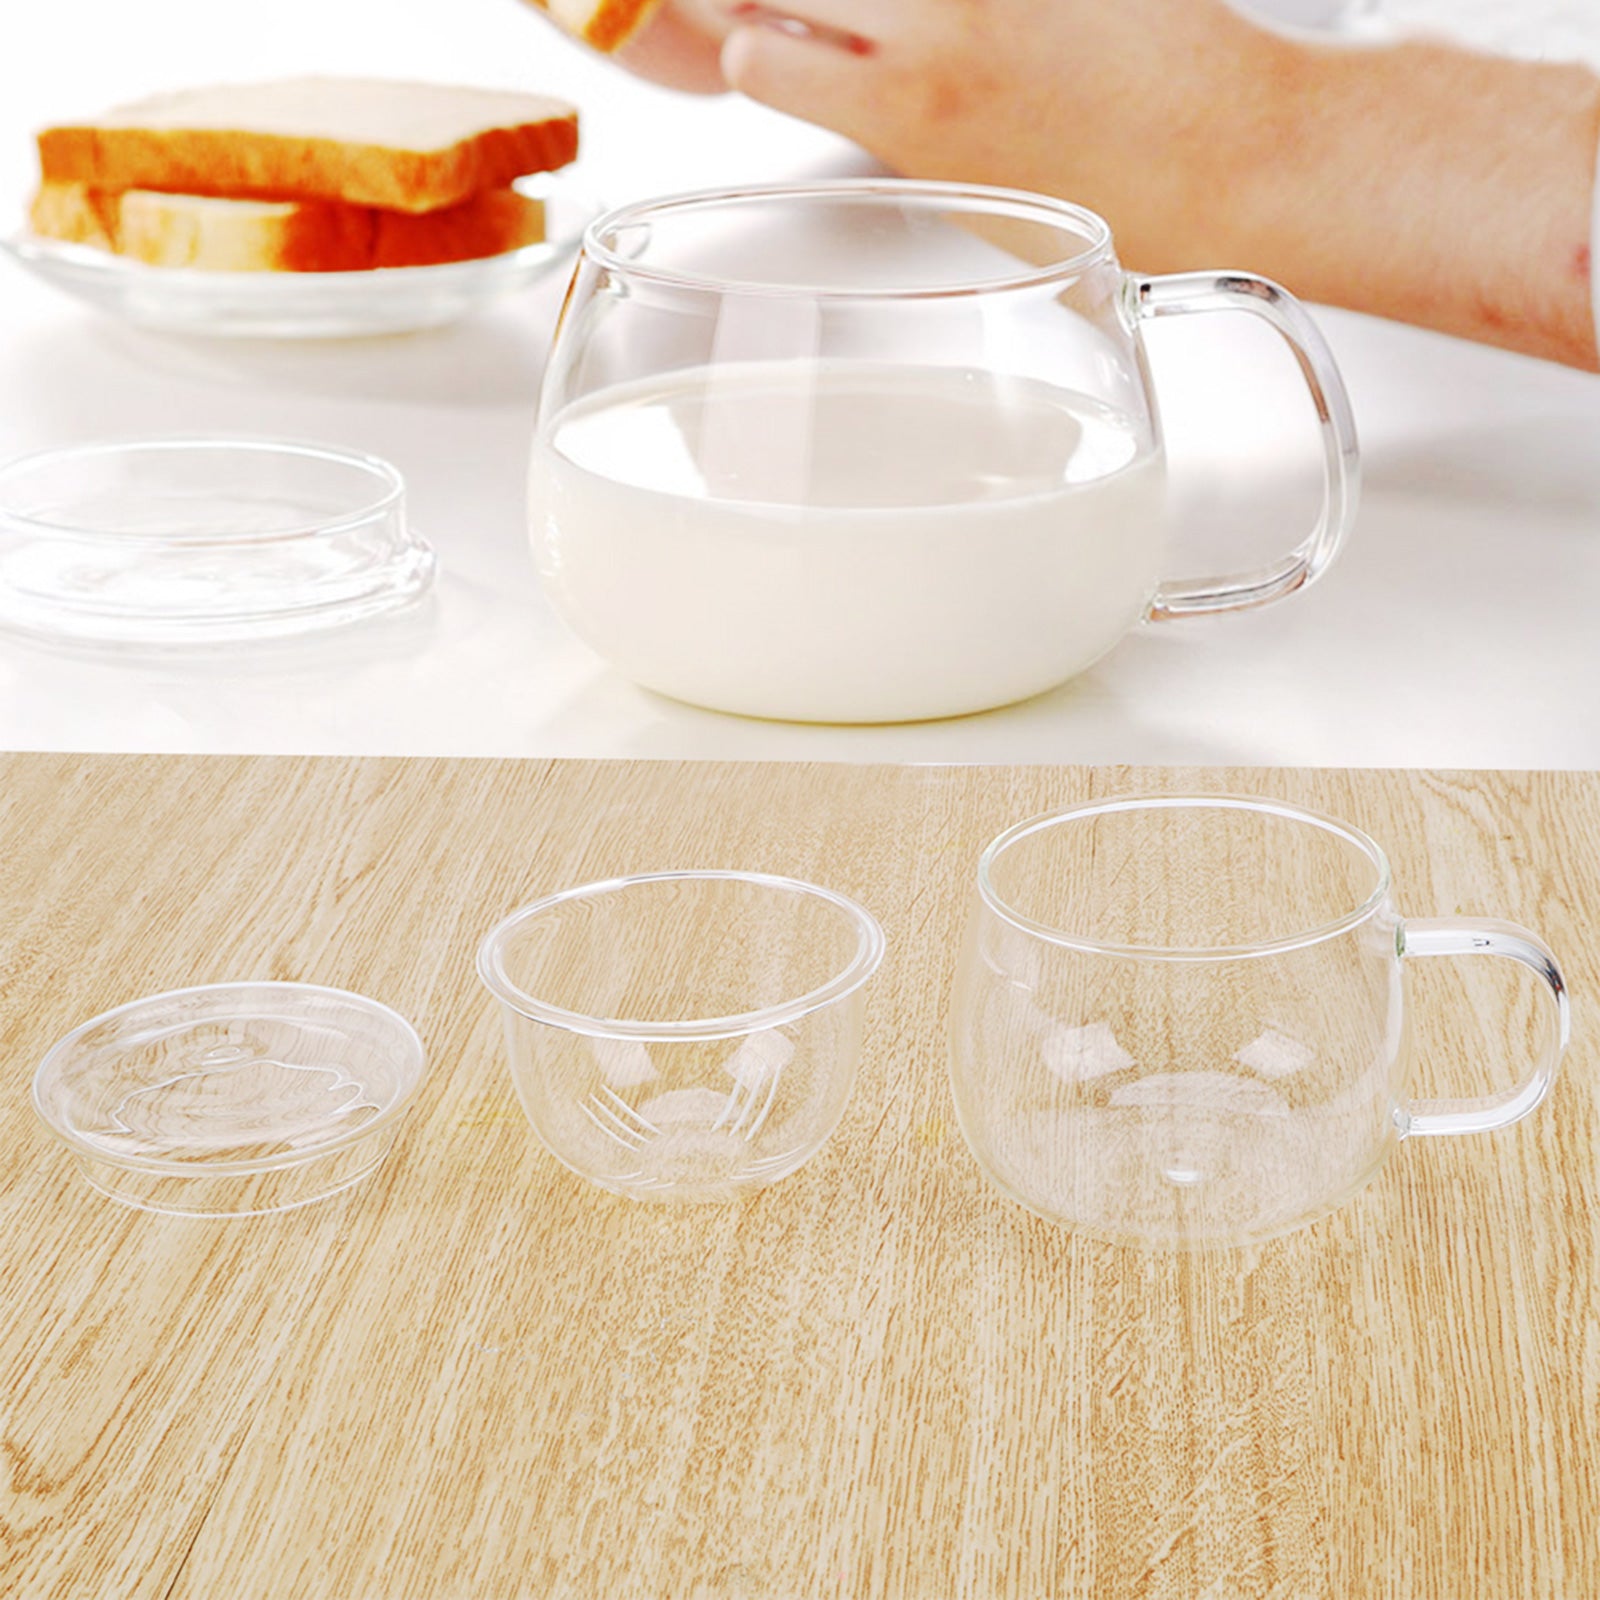 Large Glass Mugs With Lid And Infuser (5 models)